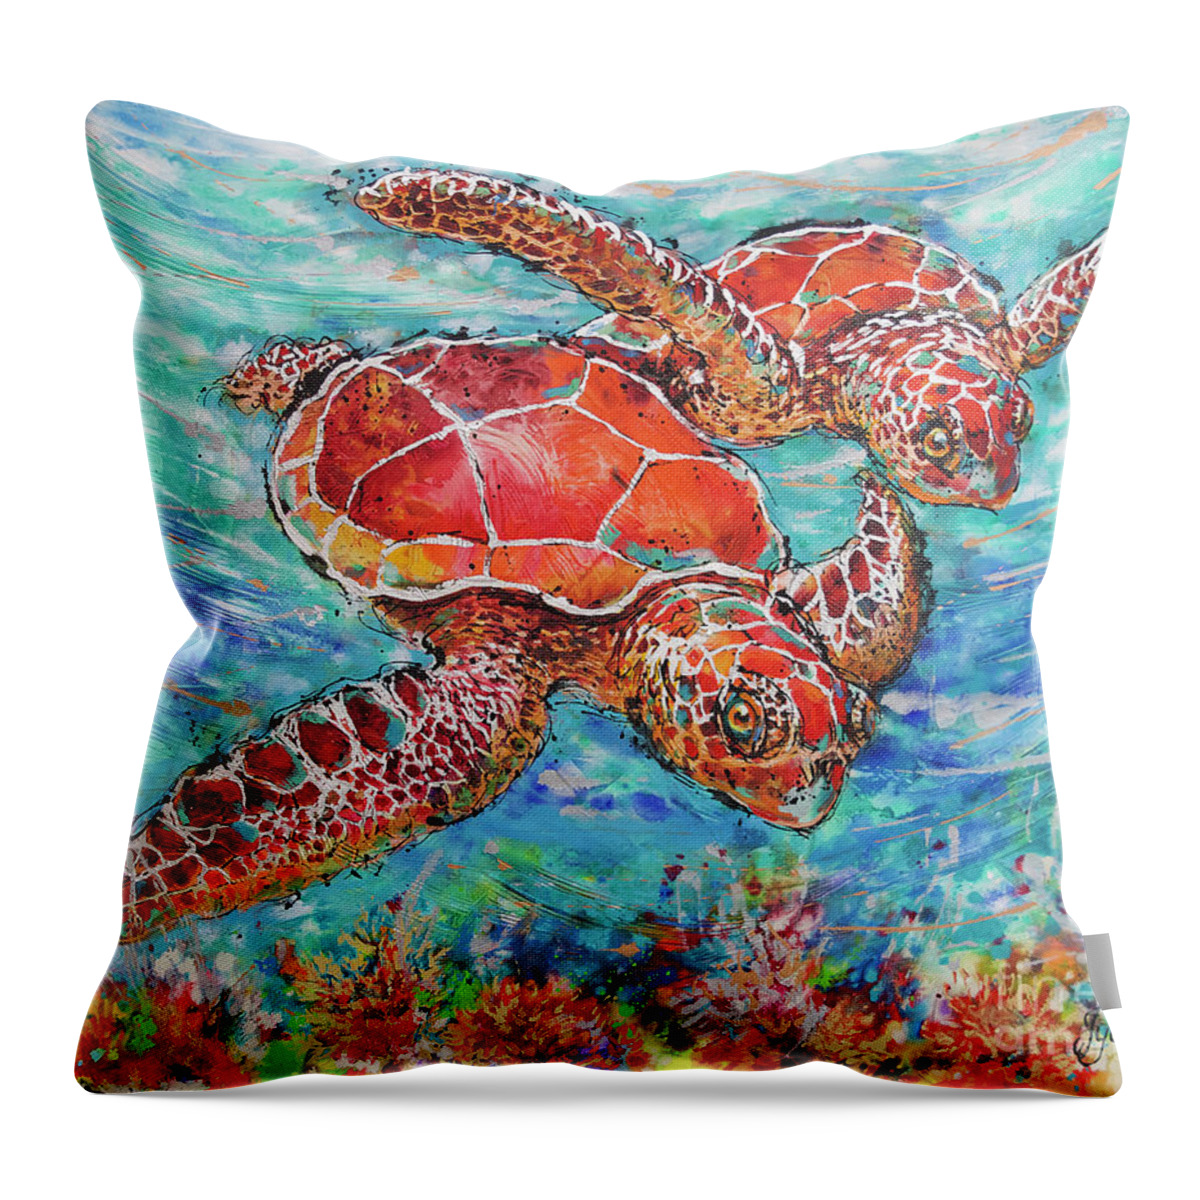 Marine Turtles Throw Pillow featuring the painting Sea Turtles on Coral Reef by Jyotika Shroff